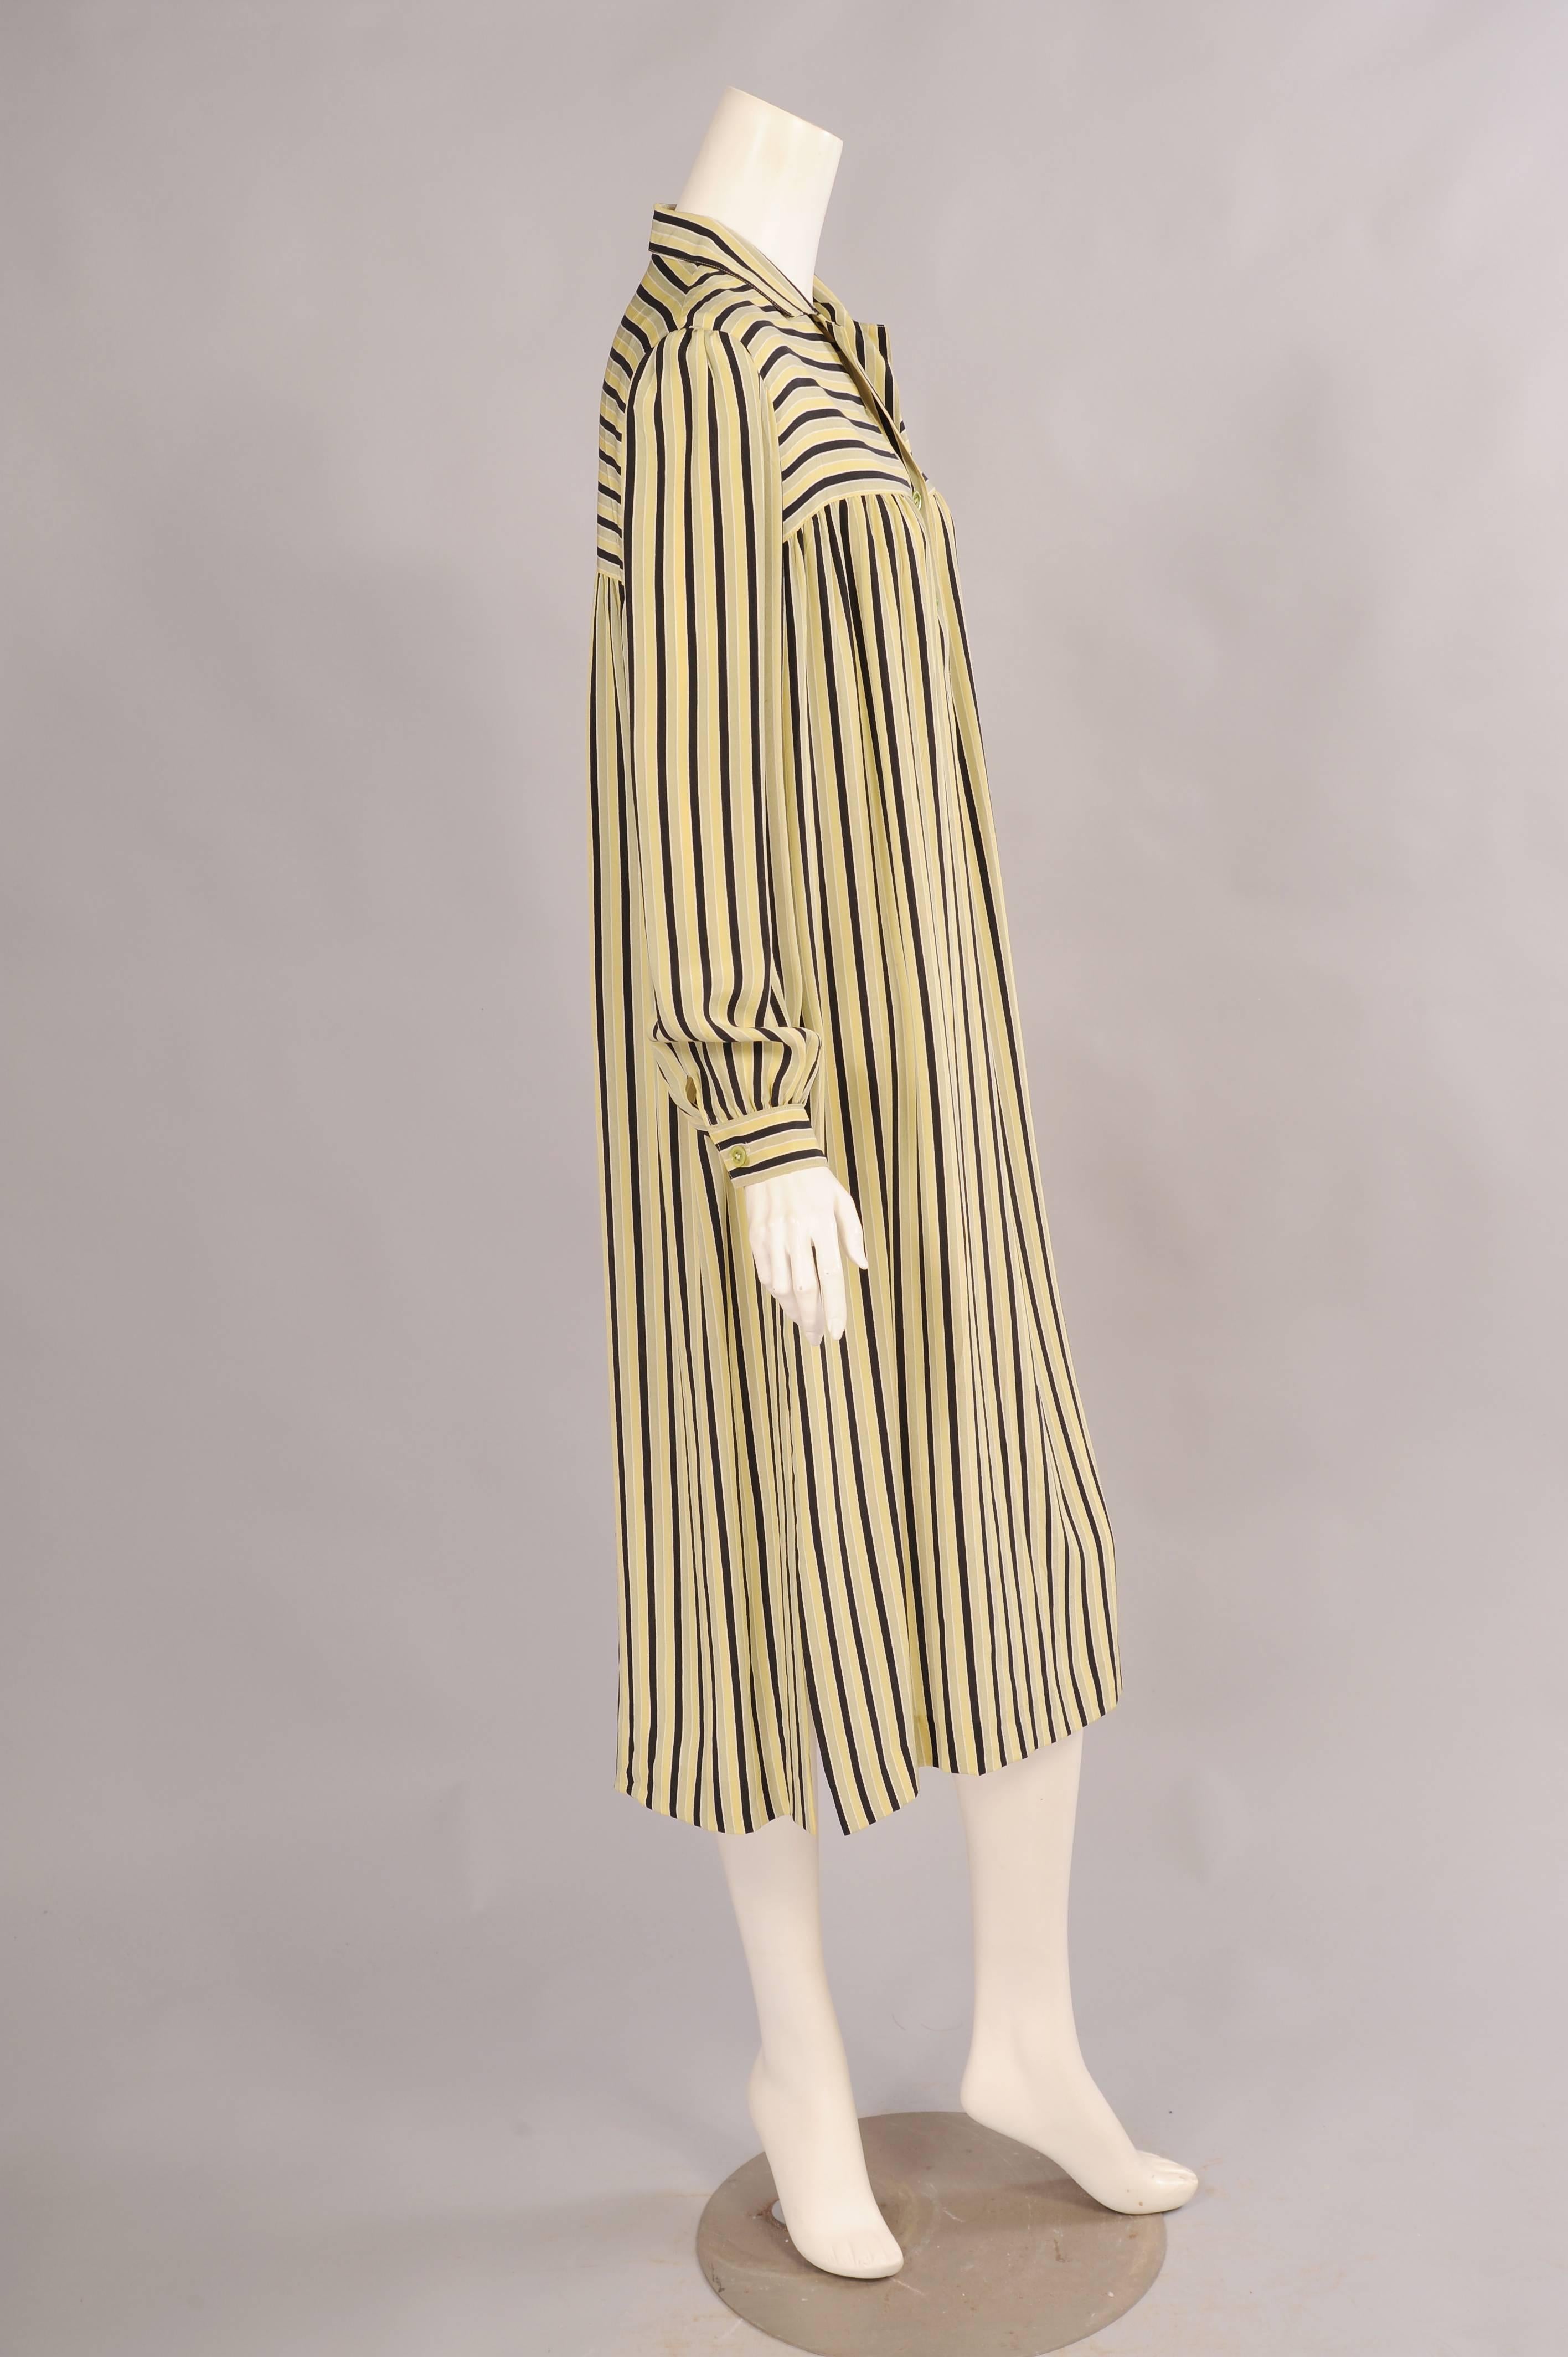 This 1970's Guy Laroche striped silk dress has a horizontally striped  yoke at the front and back above the vertically striped body of the dress. It slips on over your head and there are buttons at the center front. The long sleeves have button